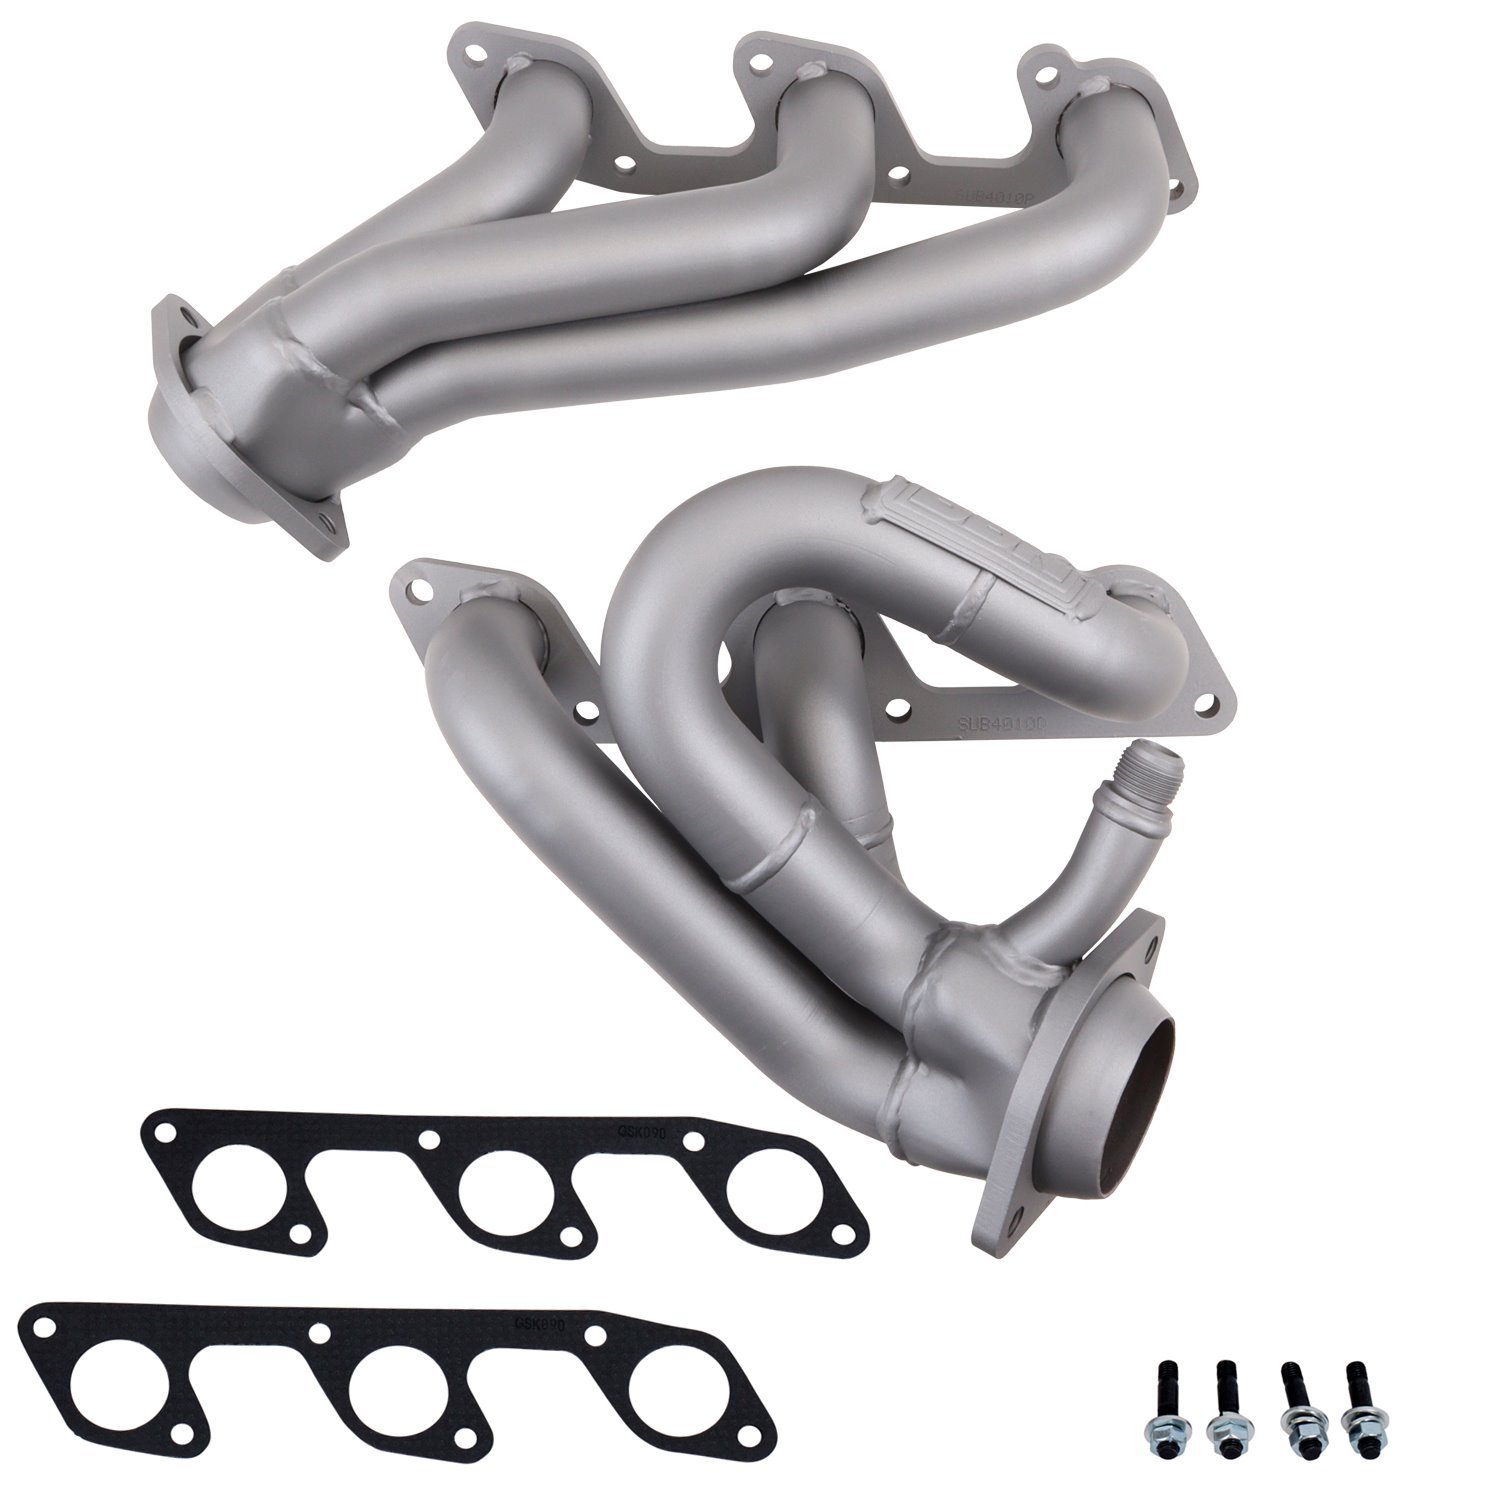 Tuned-Length Shorty Headers 2005-2010 Ford Mustang 4.0L V6